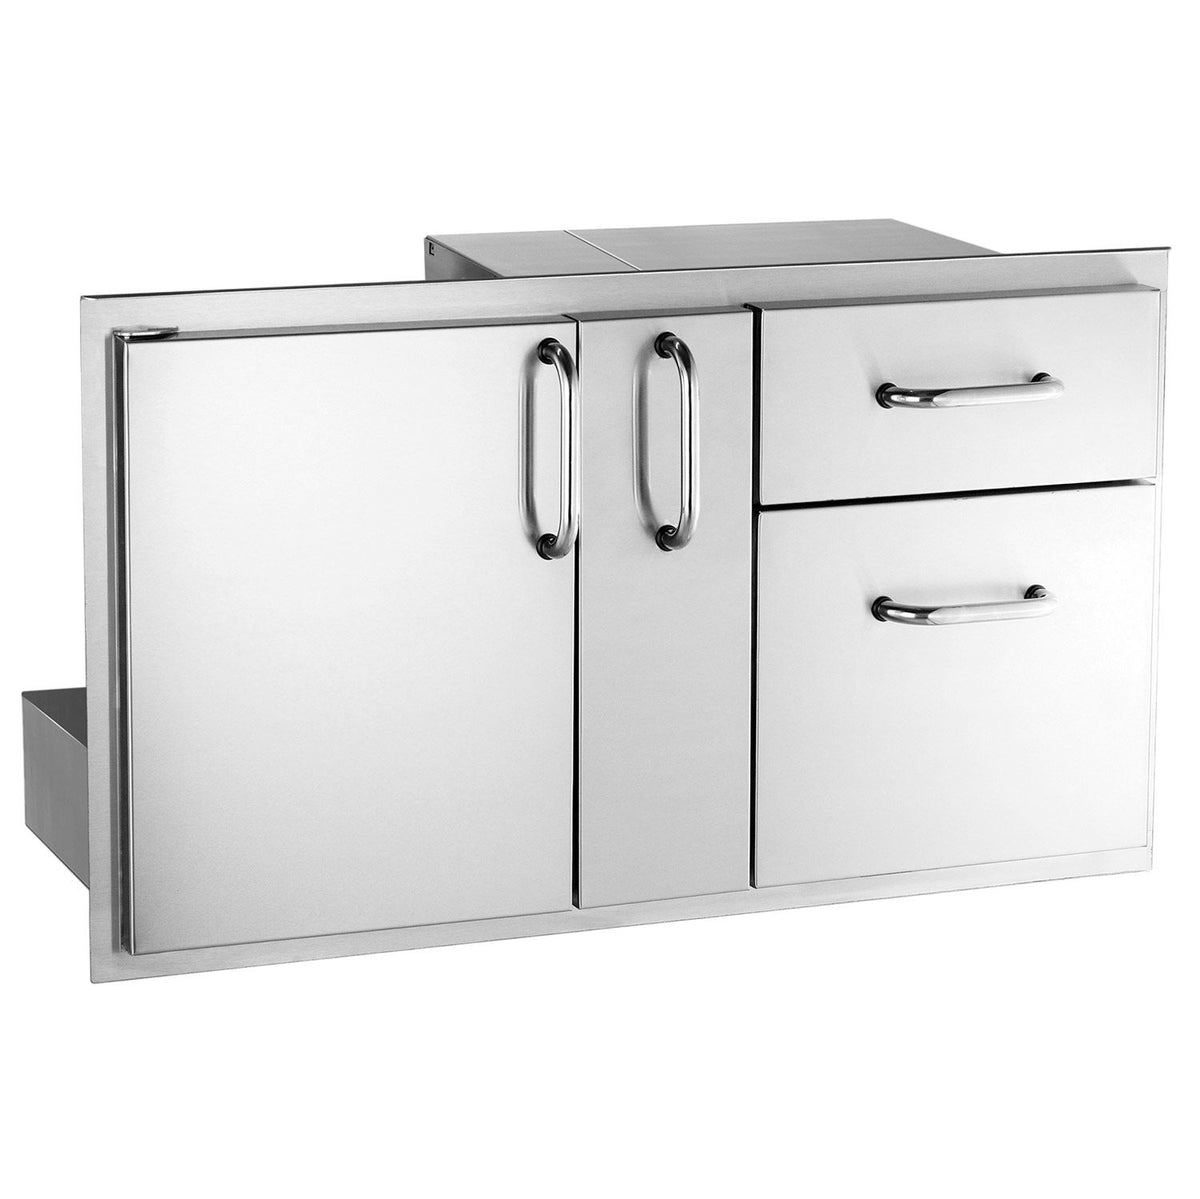 Fire Magic Select 30 Inch Access Door with Platter Storage and Double Drawers